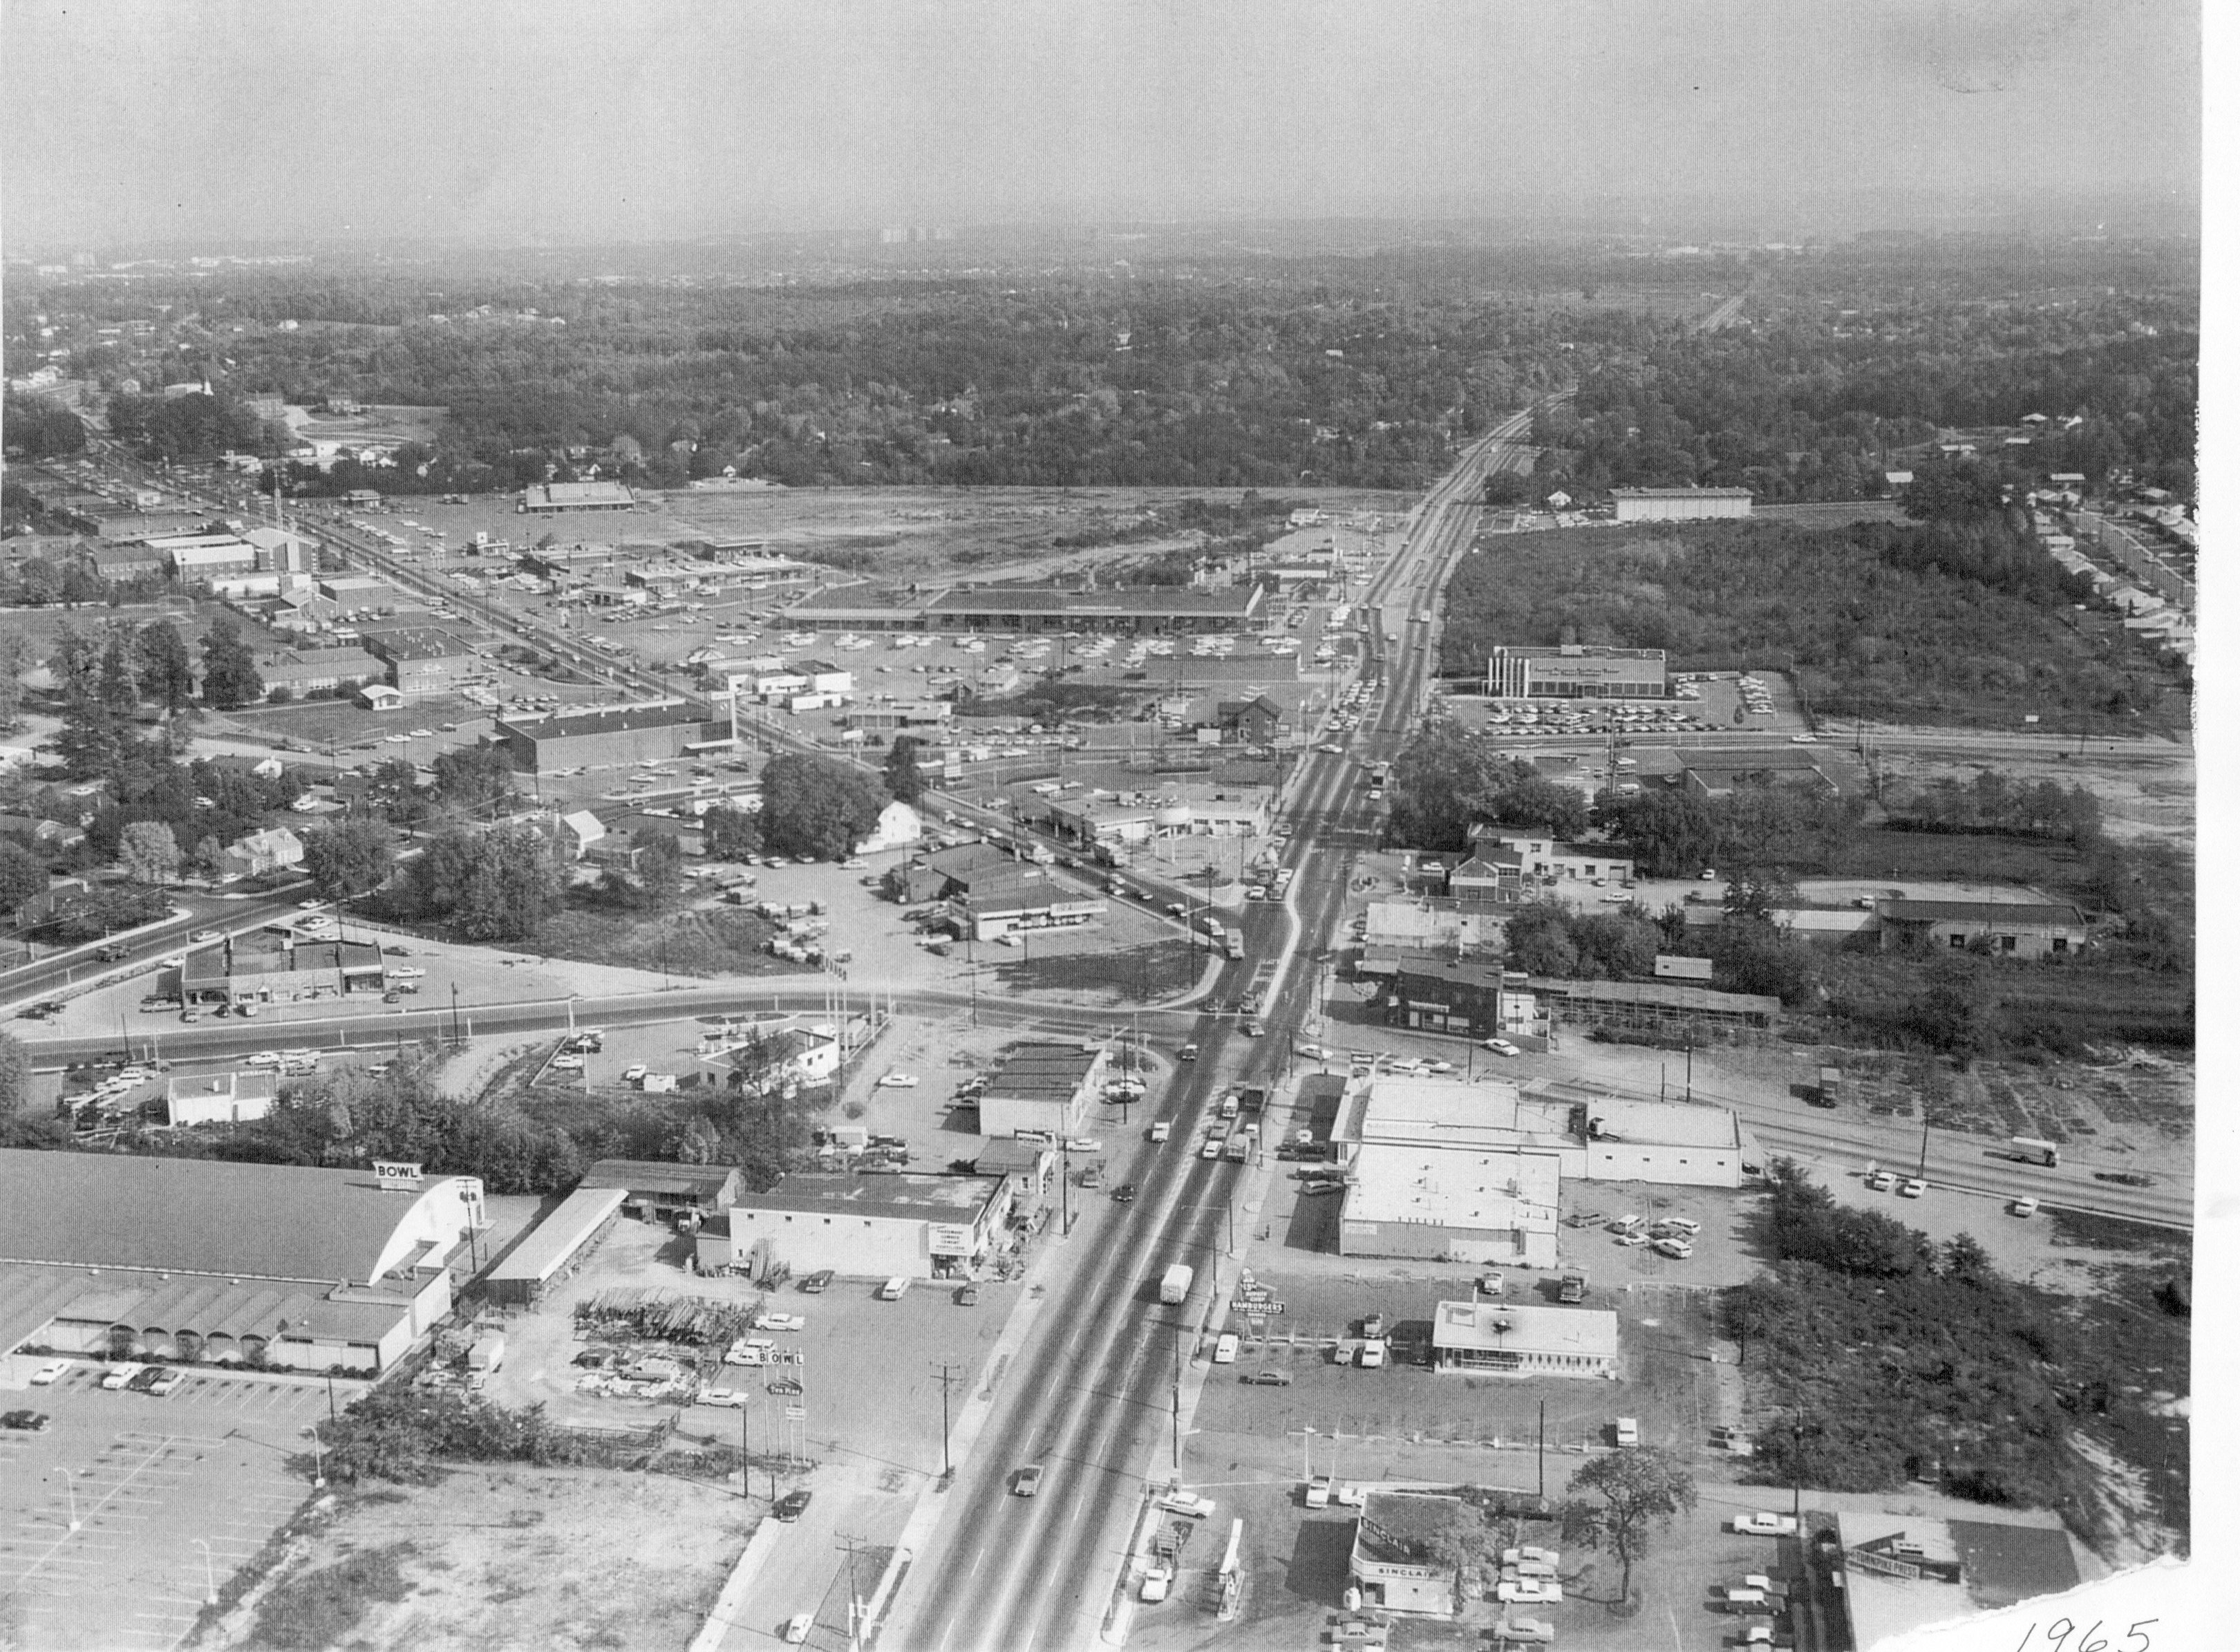 Annandale in 1965 looking east:  Photo courtesy of the ACC photographic archive, with all rights reserved.